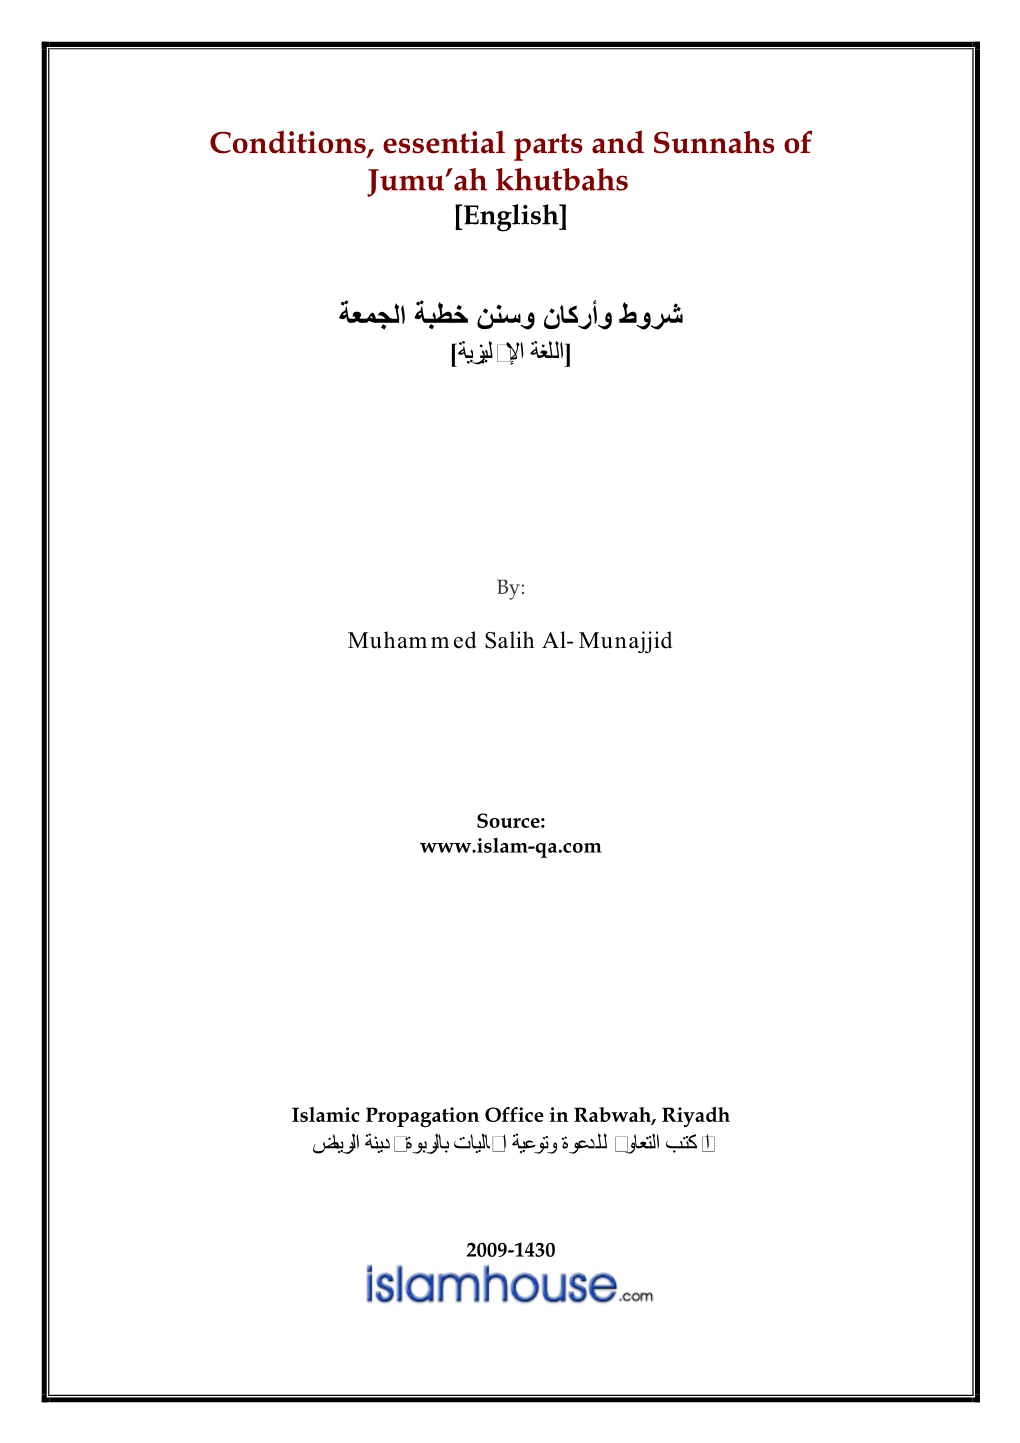 Conditions, Essential Parts and Sunnahs of Jumu'ah Khutbahs